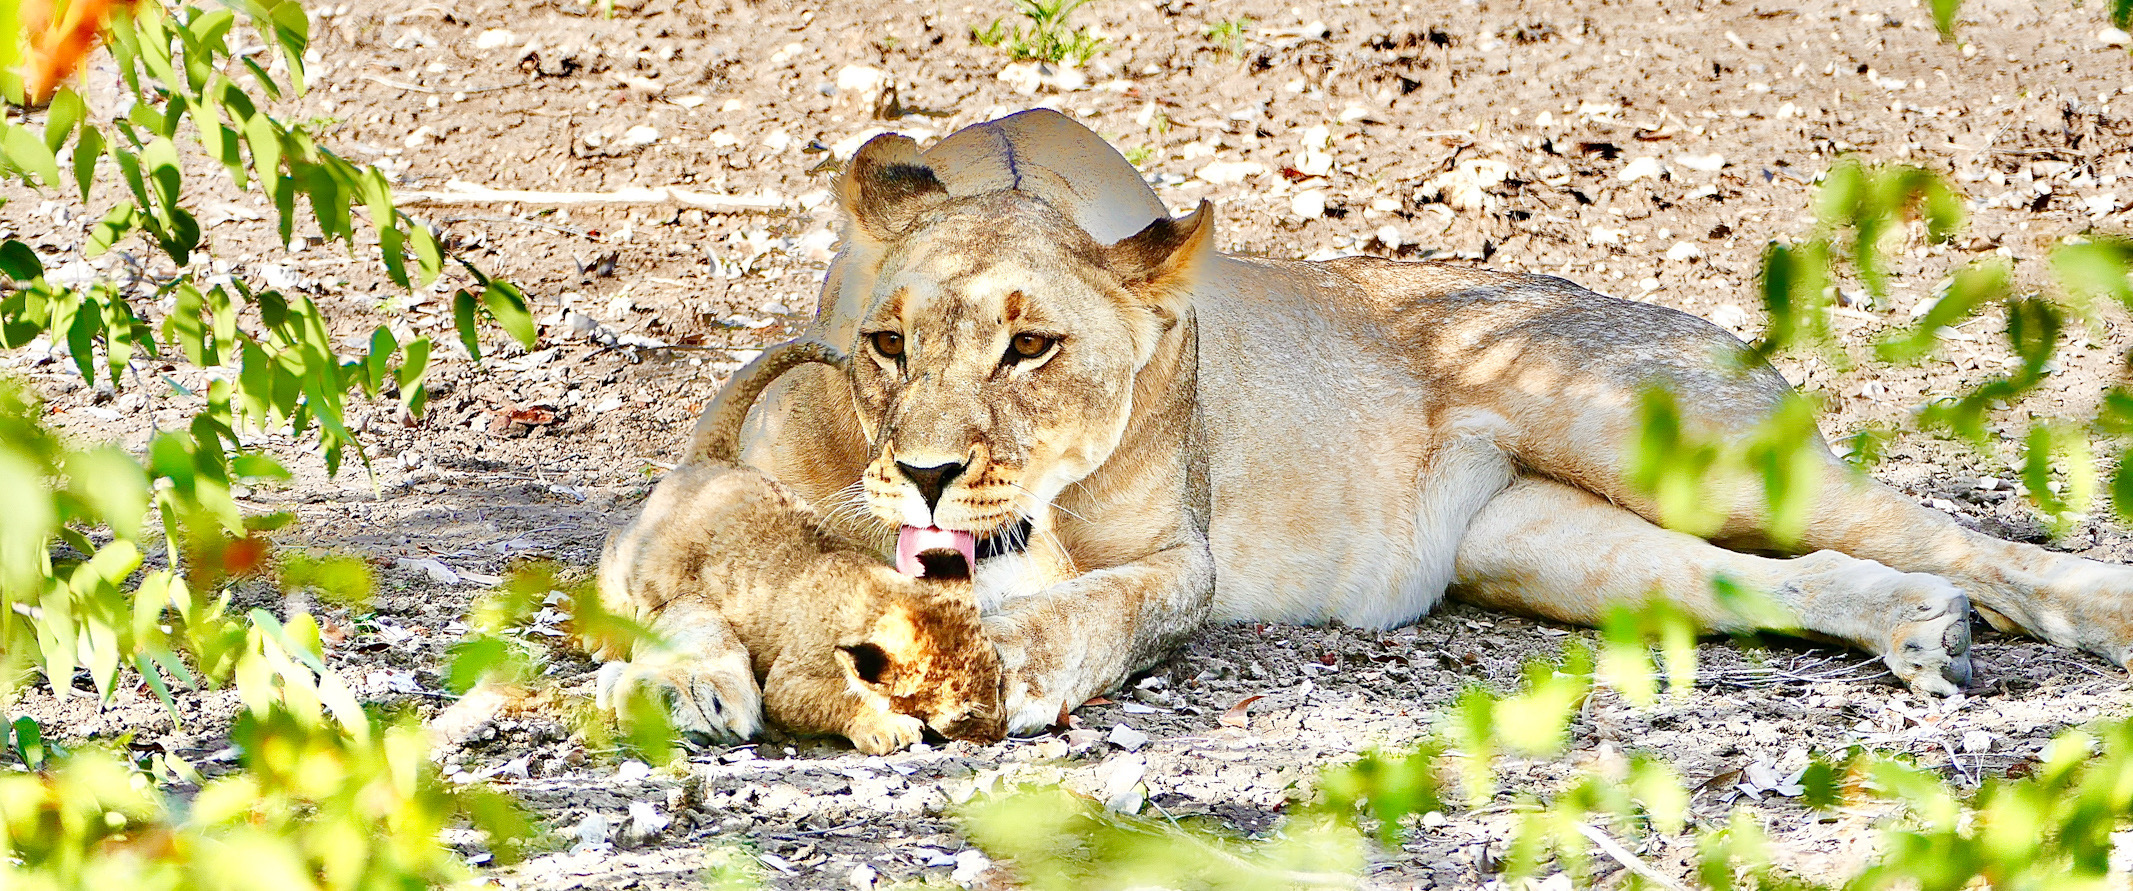 Caring Lioness